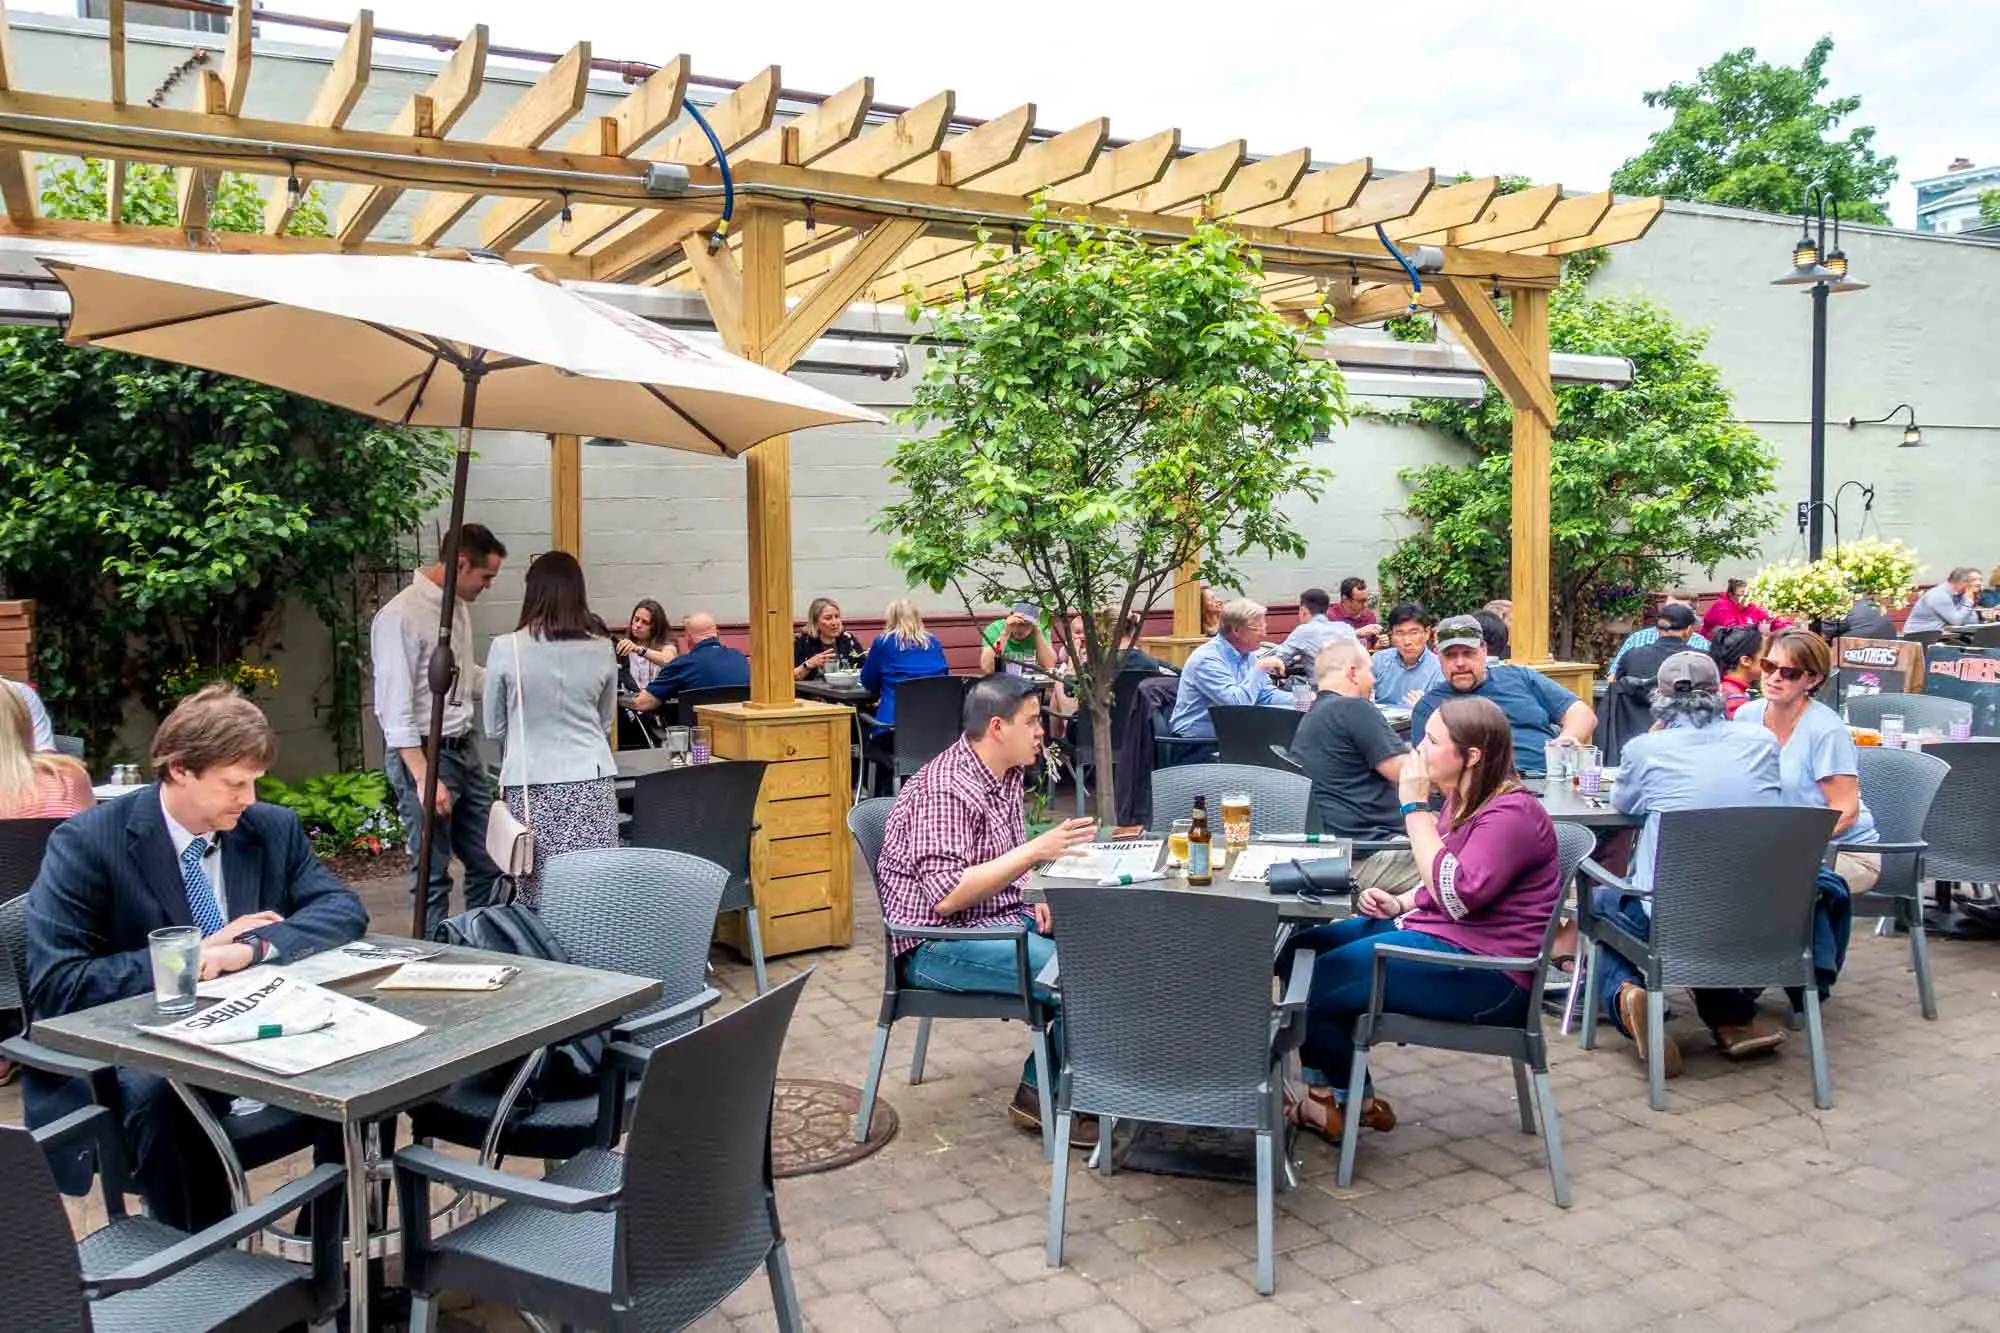 People sitting at outdoor tables under a pergola at a restaurant